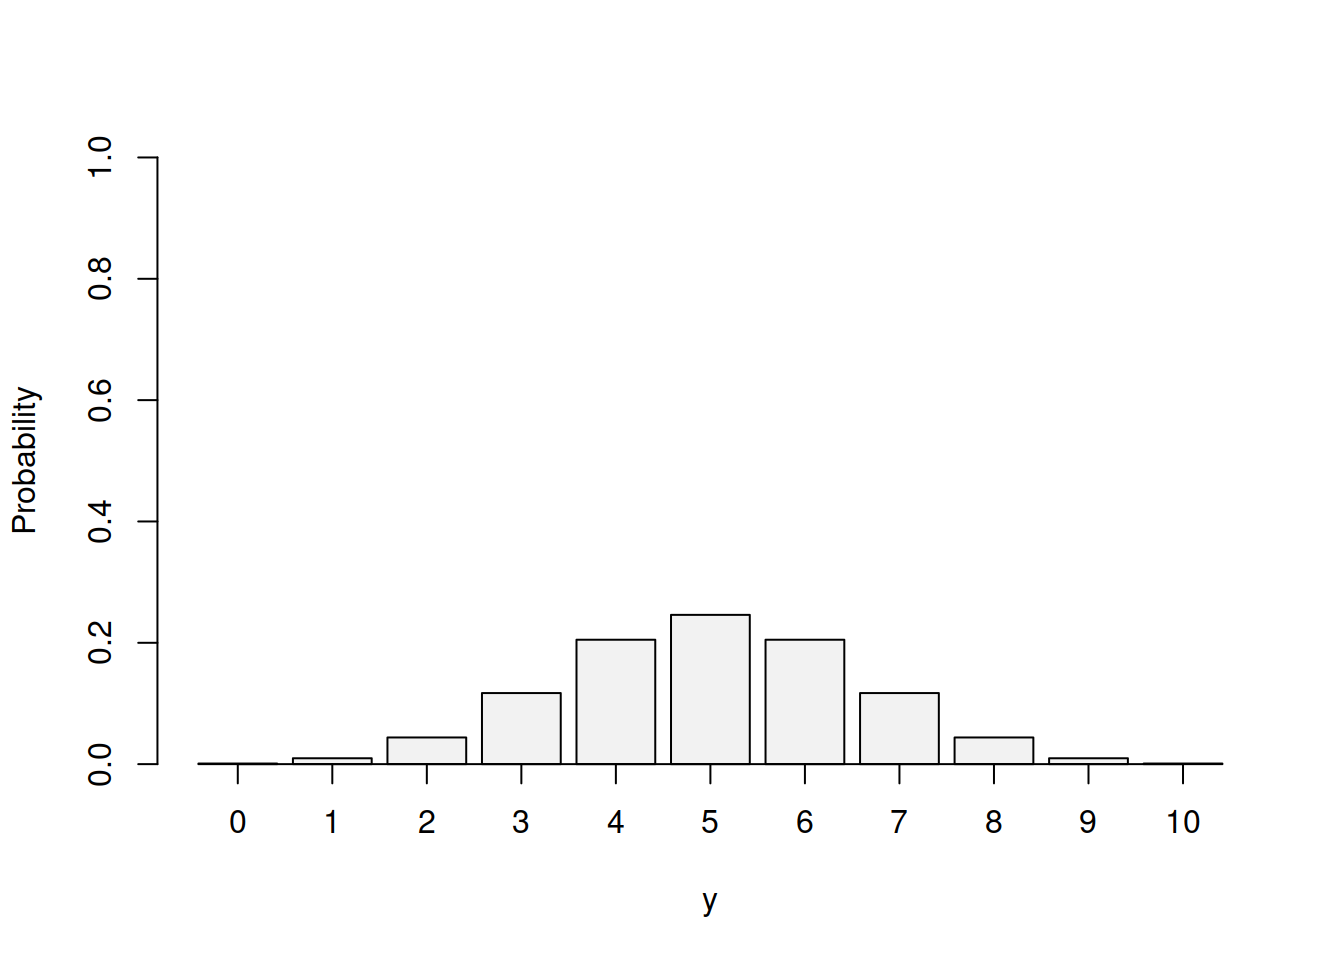 Probability Mass Function for Binomial distribution with p=0.5 and n=10.